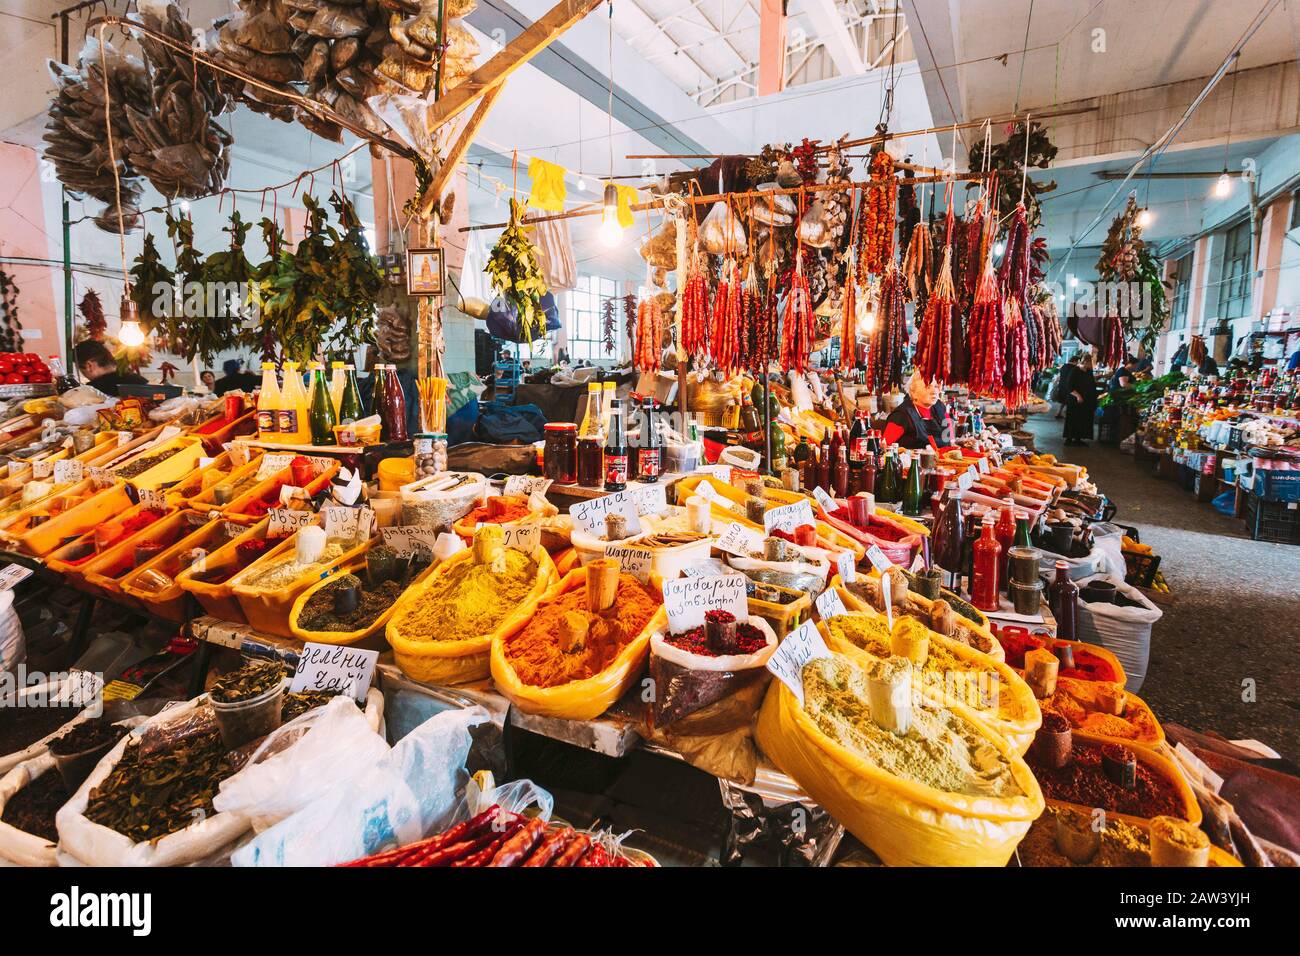 Batumi, Georgia - May 28, 2016: Diversity Of Varicolored Fragrant Spices And Herbs, Traditional Sauces, Condiments, Churchkhelas On The Counter Showca Stock Photo